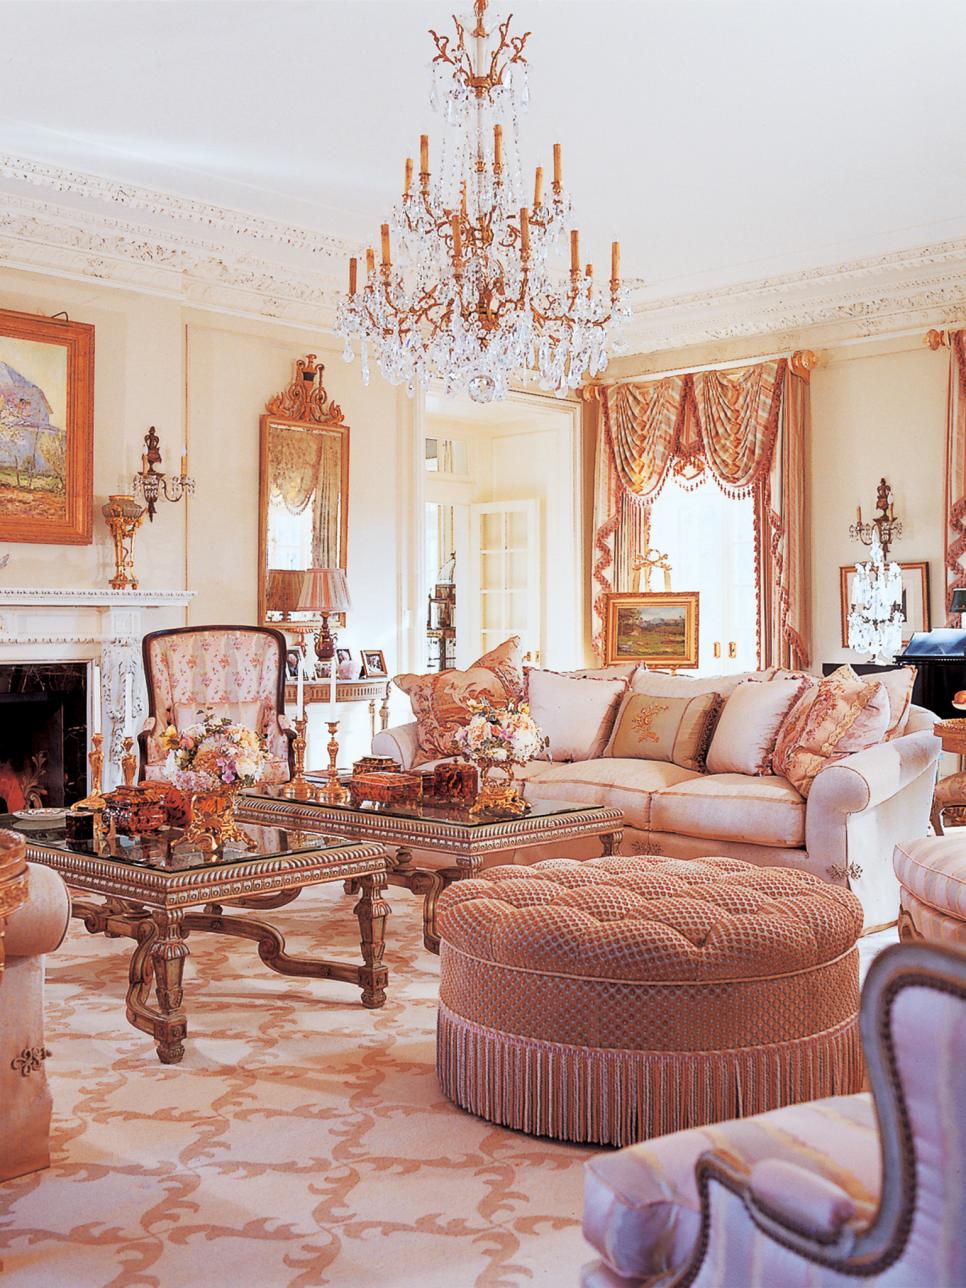 Neutral Living Room With Chandelier, Peach Valance & Gilt Mirror